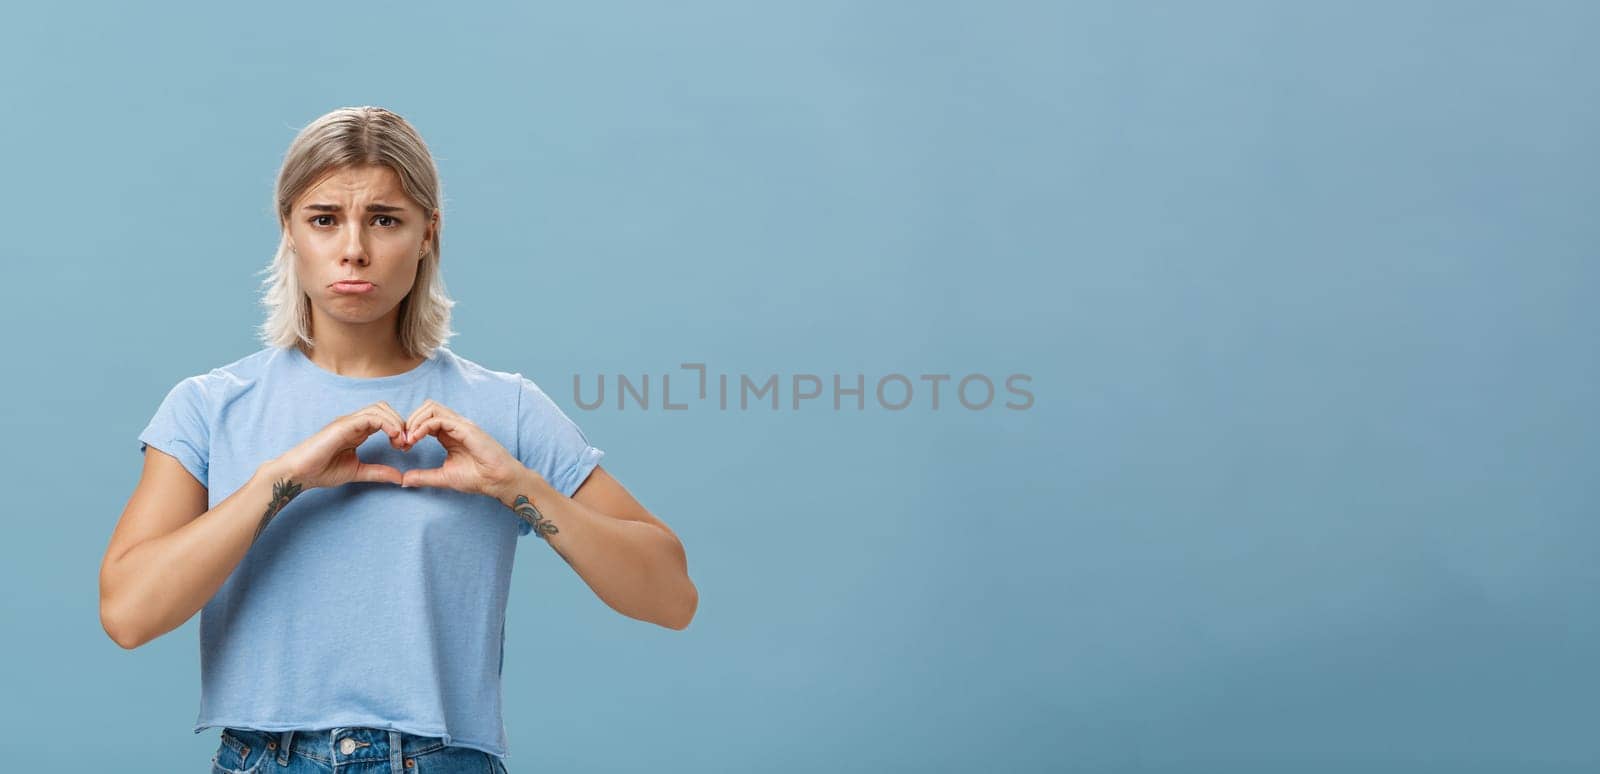 Heart being broken. Sad and gloomy heartbroken girl with blond hair tattoos on arms and tanned skin pursing lips whining and complaining making love sign over breast standing unhappy near blue wall.